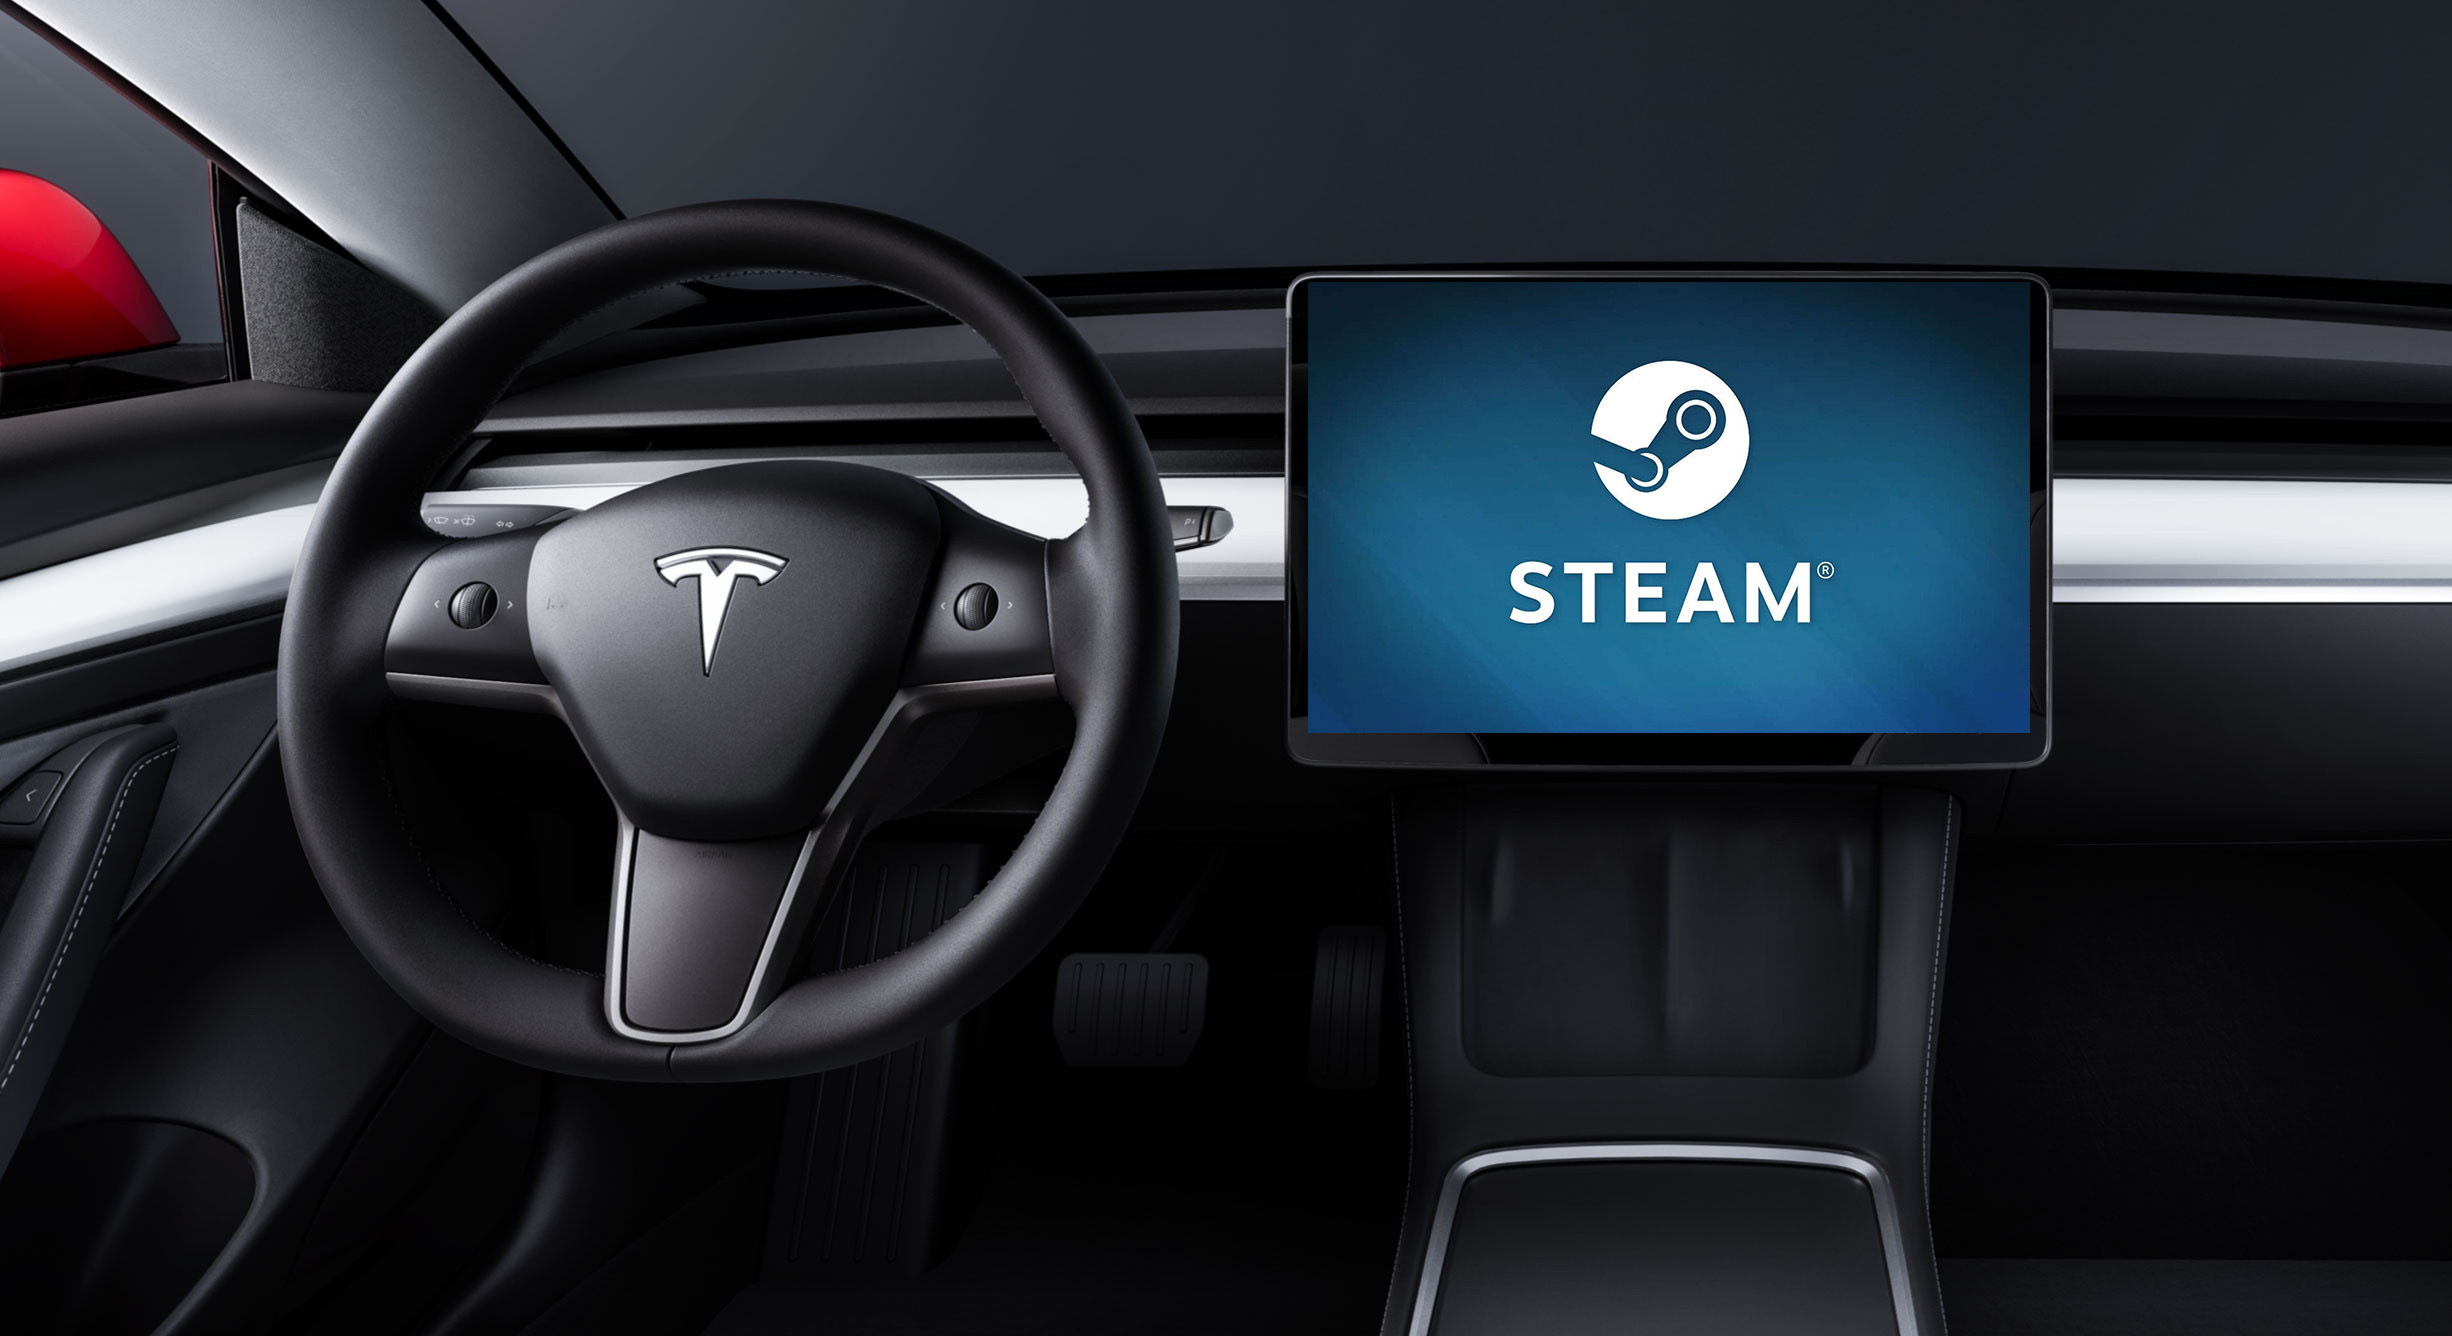 Steam games on a Tesla vehicle?